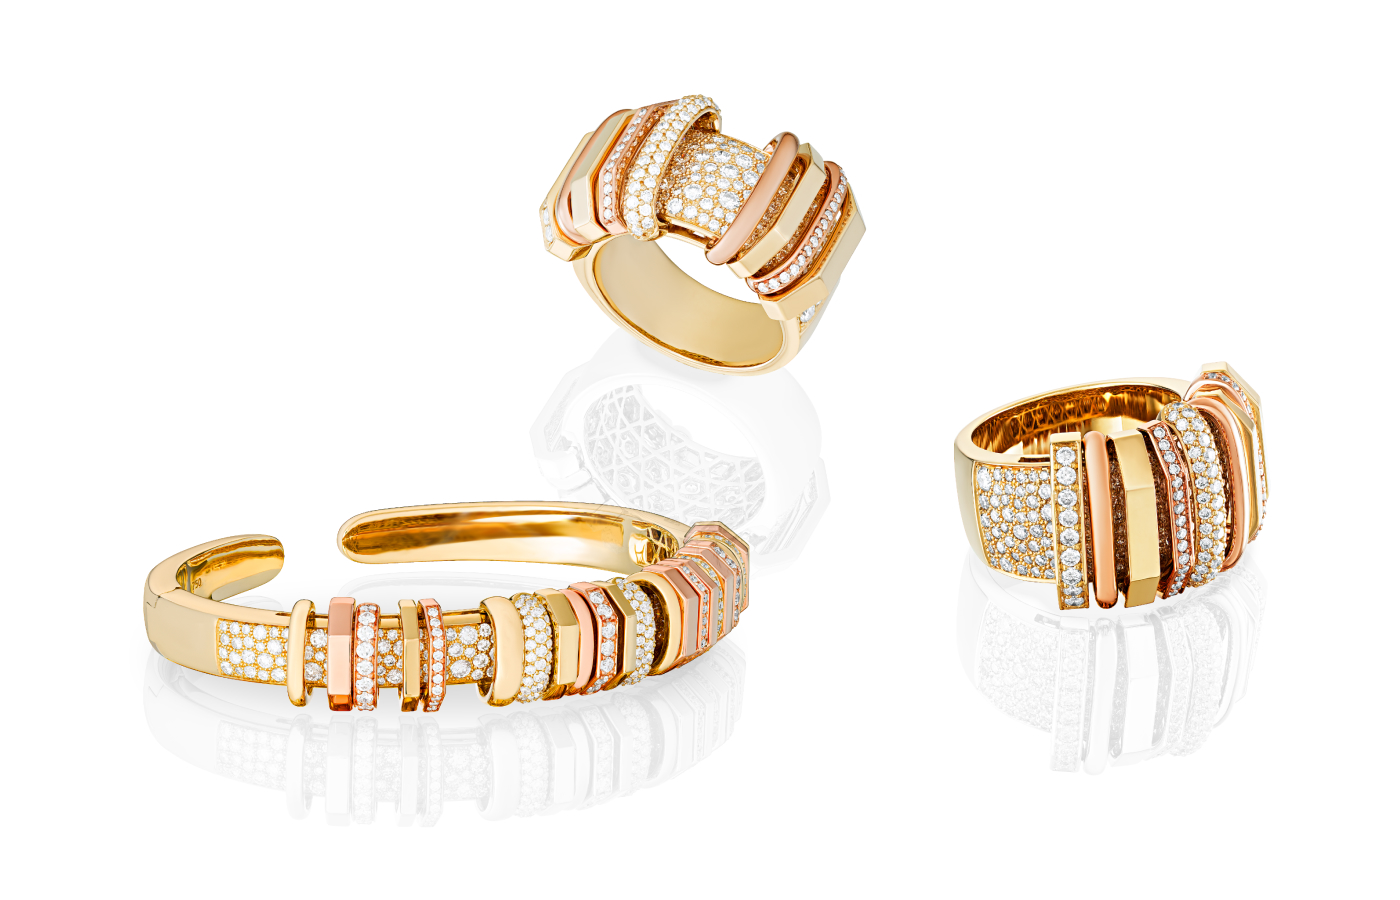 Marceline Paris Akasha rings and bracelet from the Akasha Whispering Truth collectioni in gold, rose gold and diamond